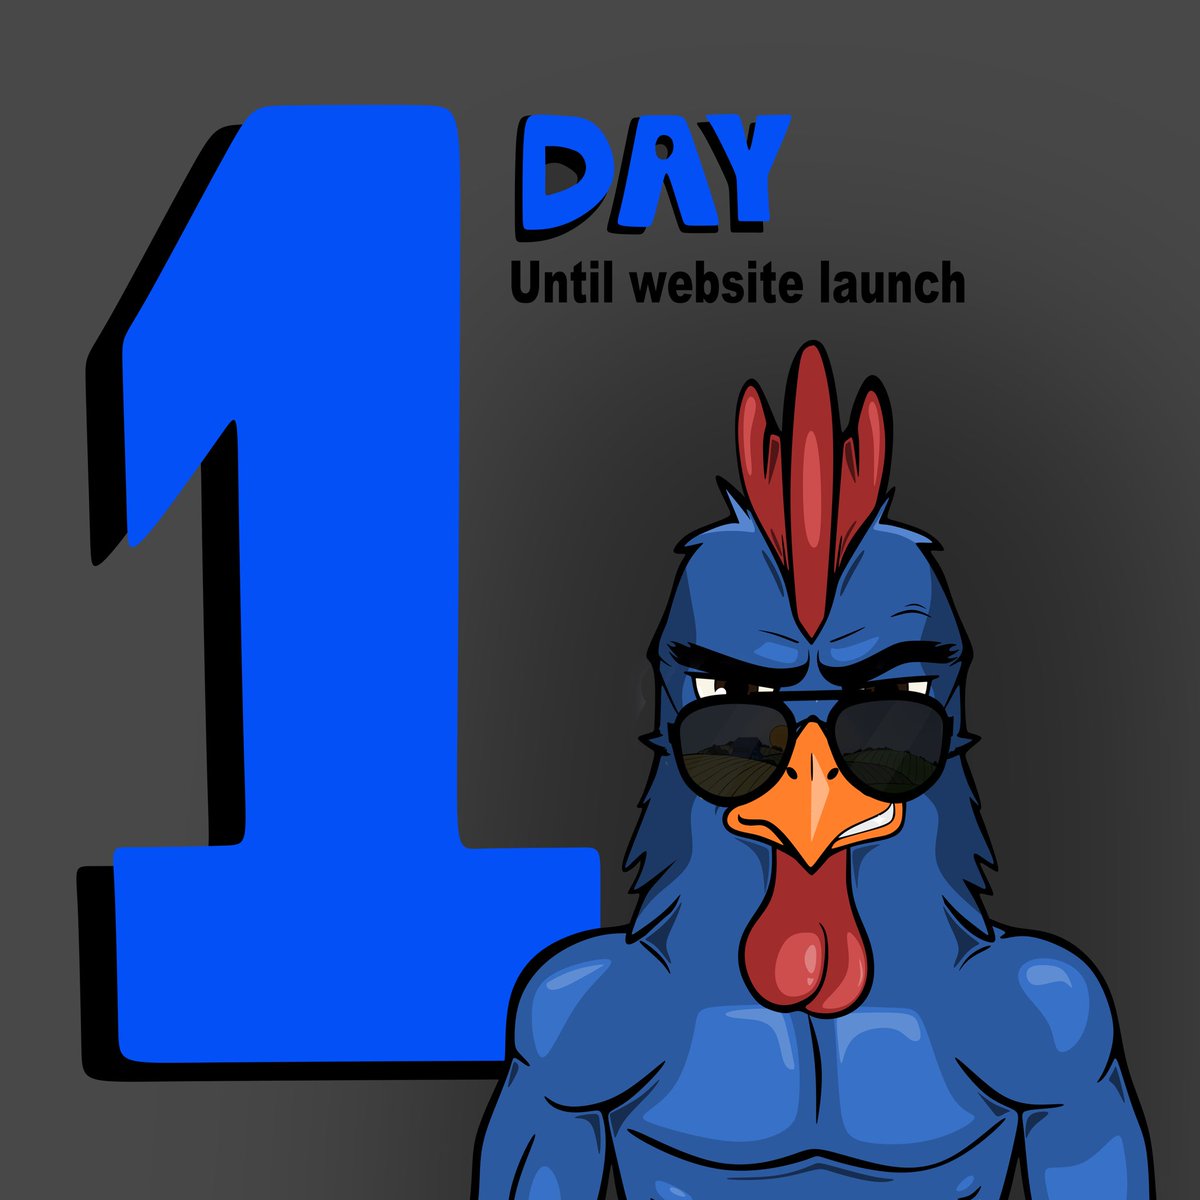 COCK-A-DOODLE-DOO! 
Just one more day until liftoff, folks! 

#cockinme